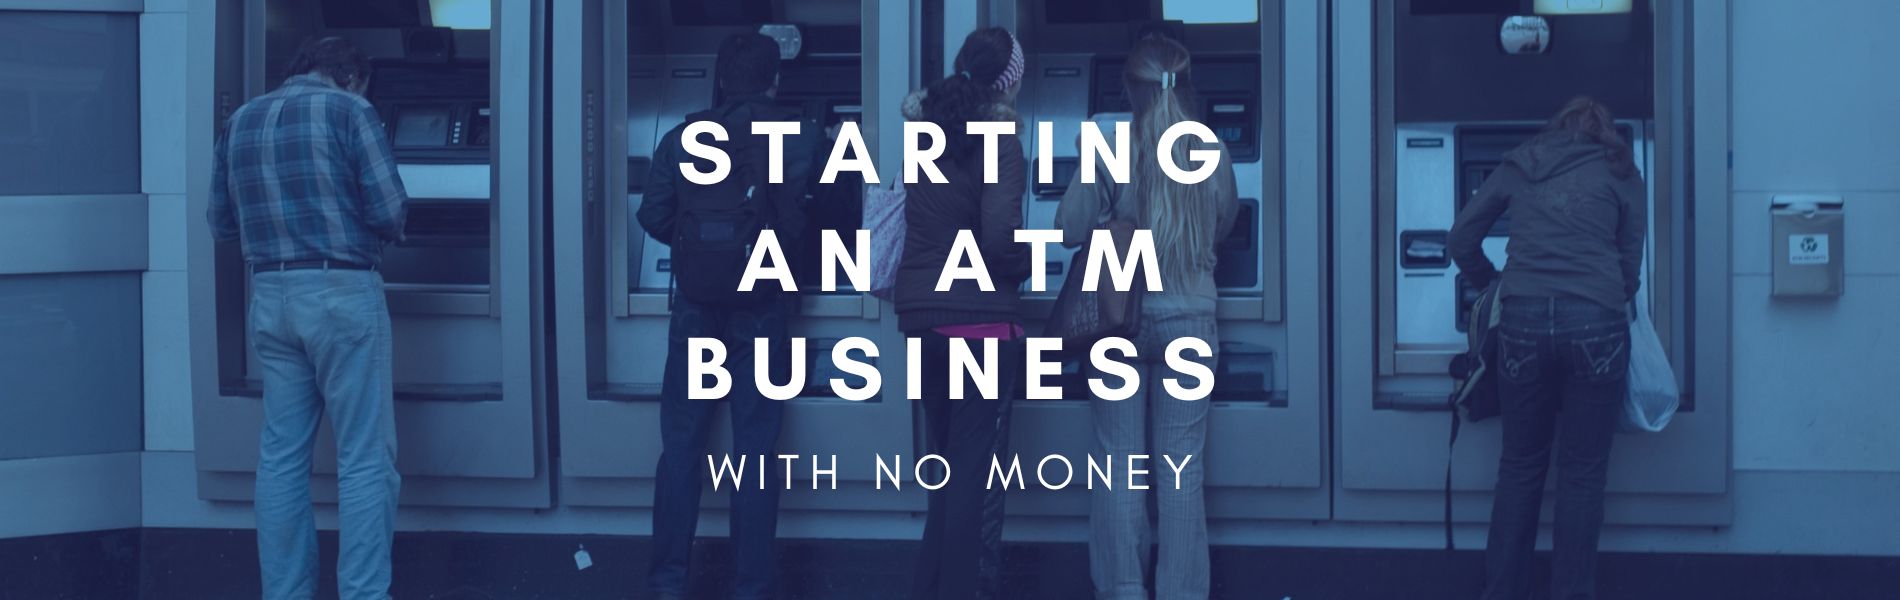 how to start an atm business with no money